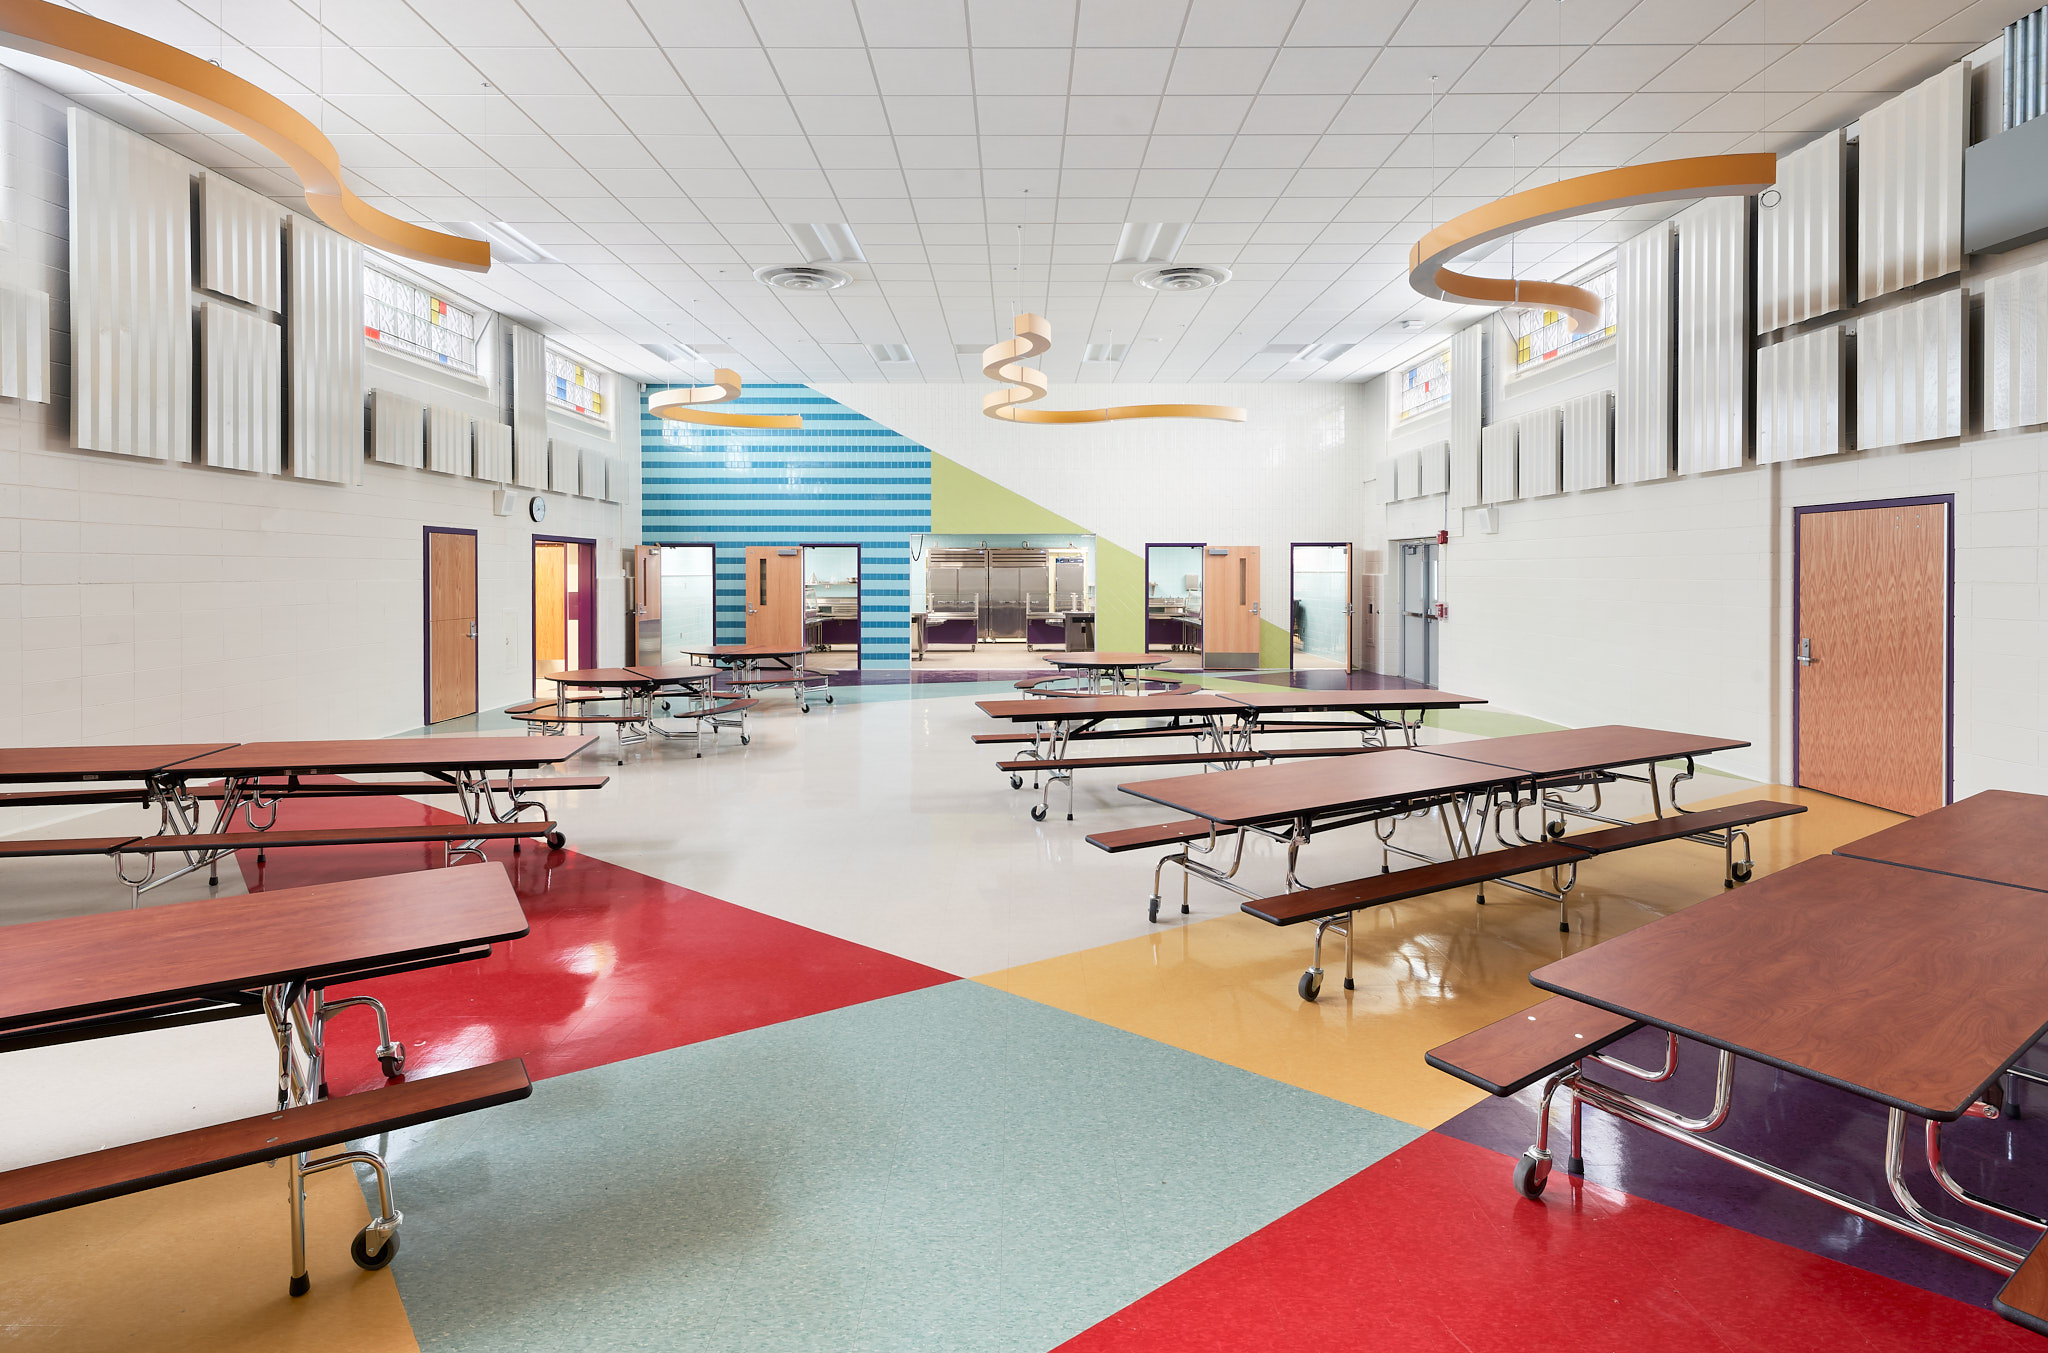 A modern and colorful cafeteria is shown. There are multiple tables. The flooring has red, blue, yellow, and white/gray. There are interesting hanging features as well.